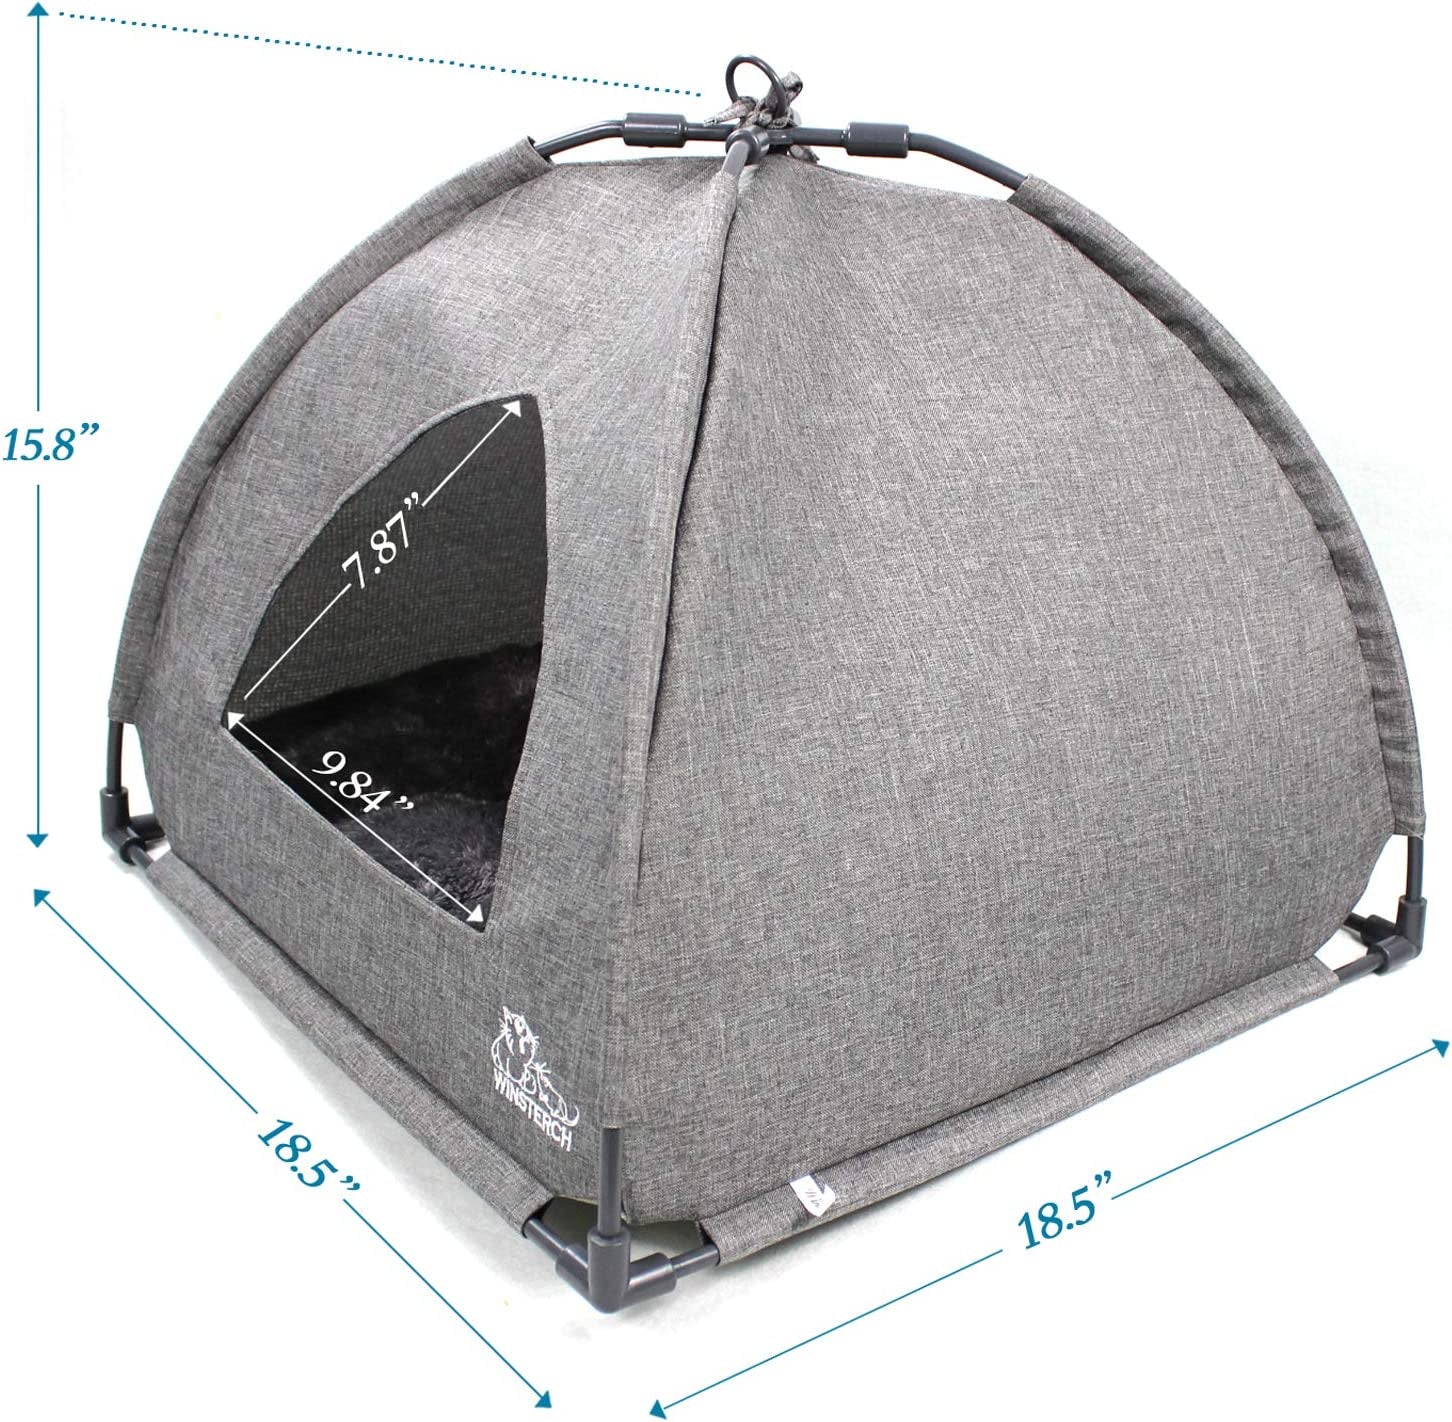 Winsterch Cat Bed for Indoor Cats,Kitten Bed,Cat Cave Bed,Warm Enclosed Covered Cat Tent,Outdoor Cave Bed House for Cats,Puppy or Small Pets (18.5'' X 18.5'' X 15.8'', Grey)